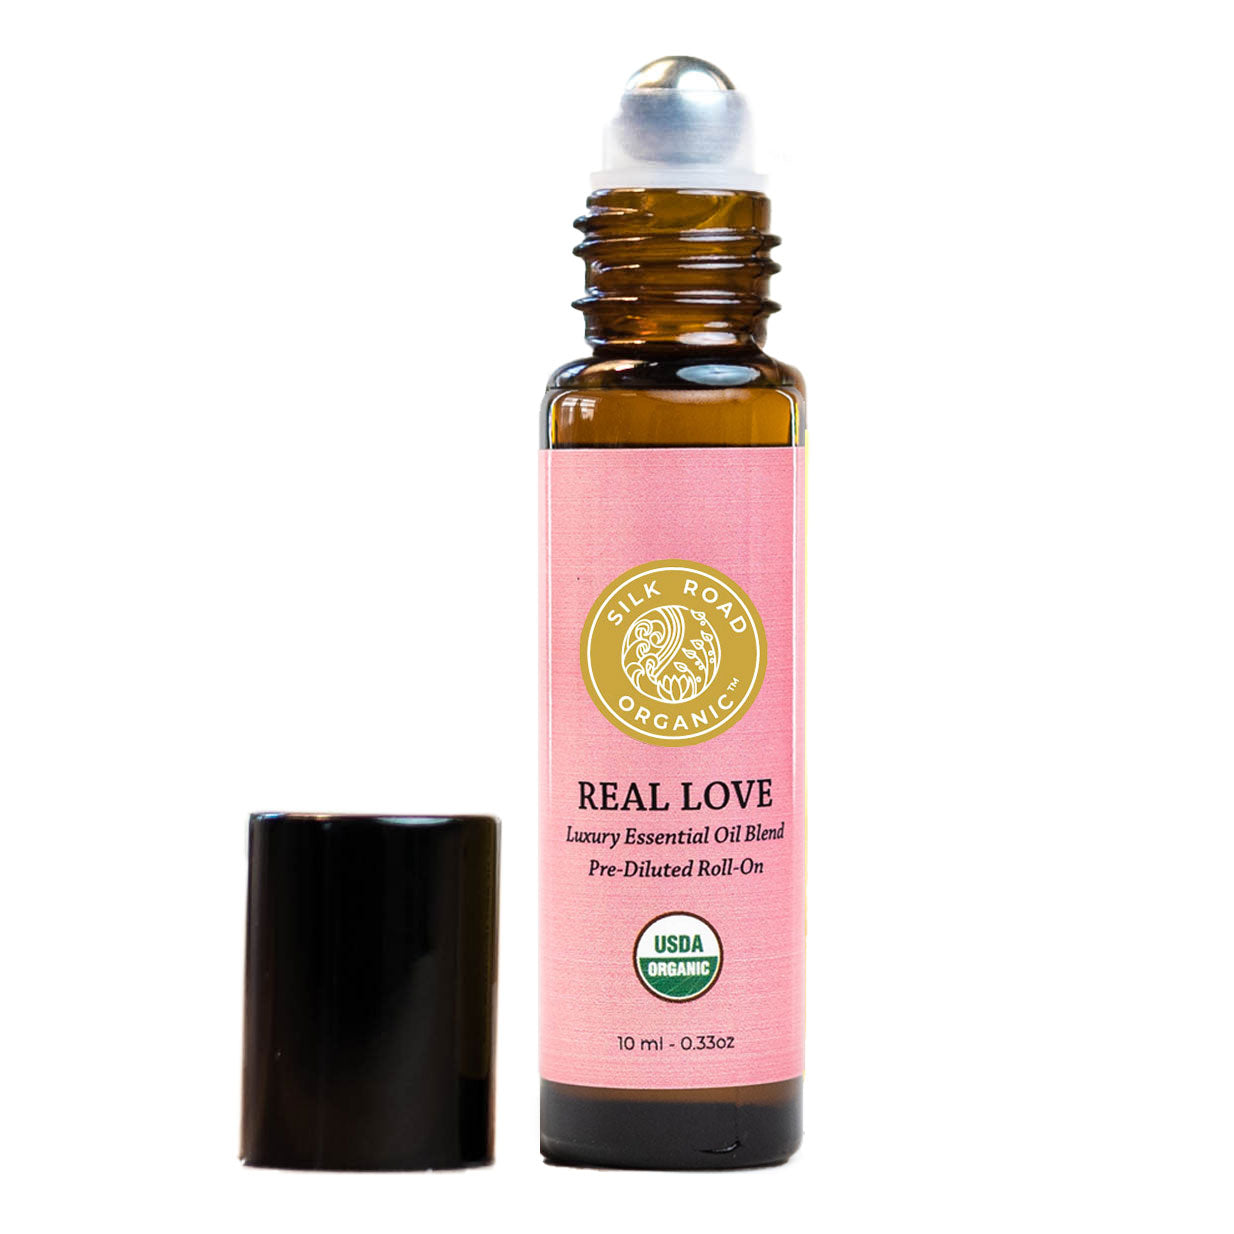 love essential oil roll-on rich floral scent romance blend silk road organic